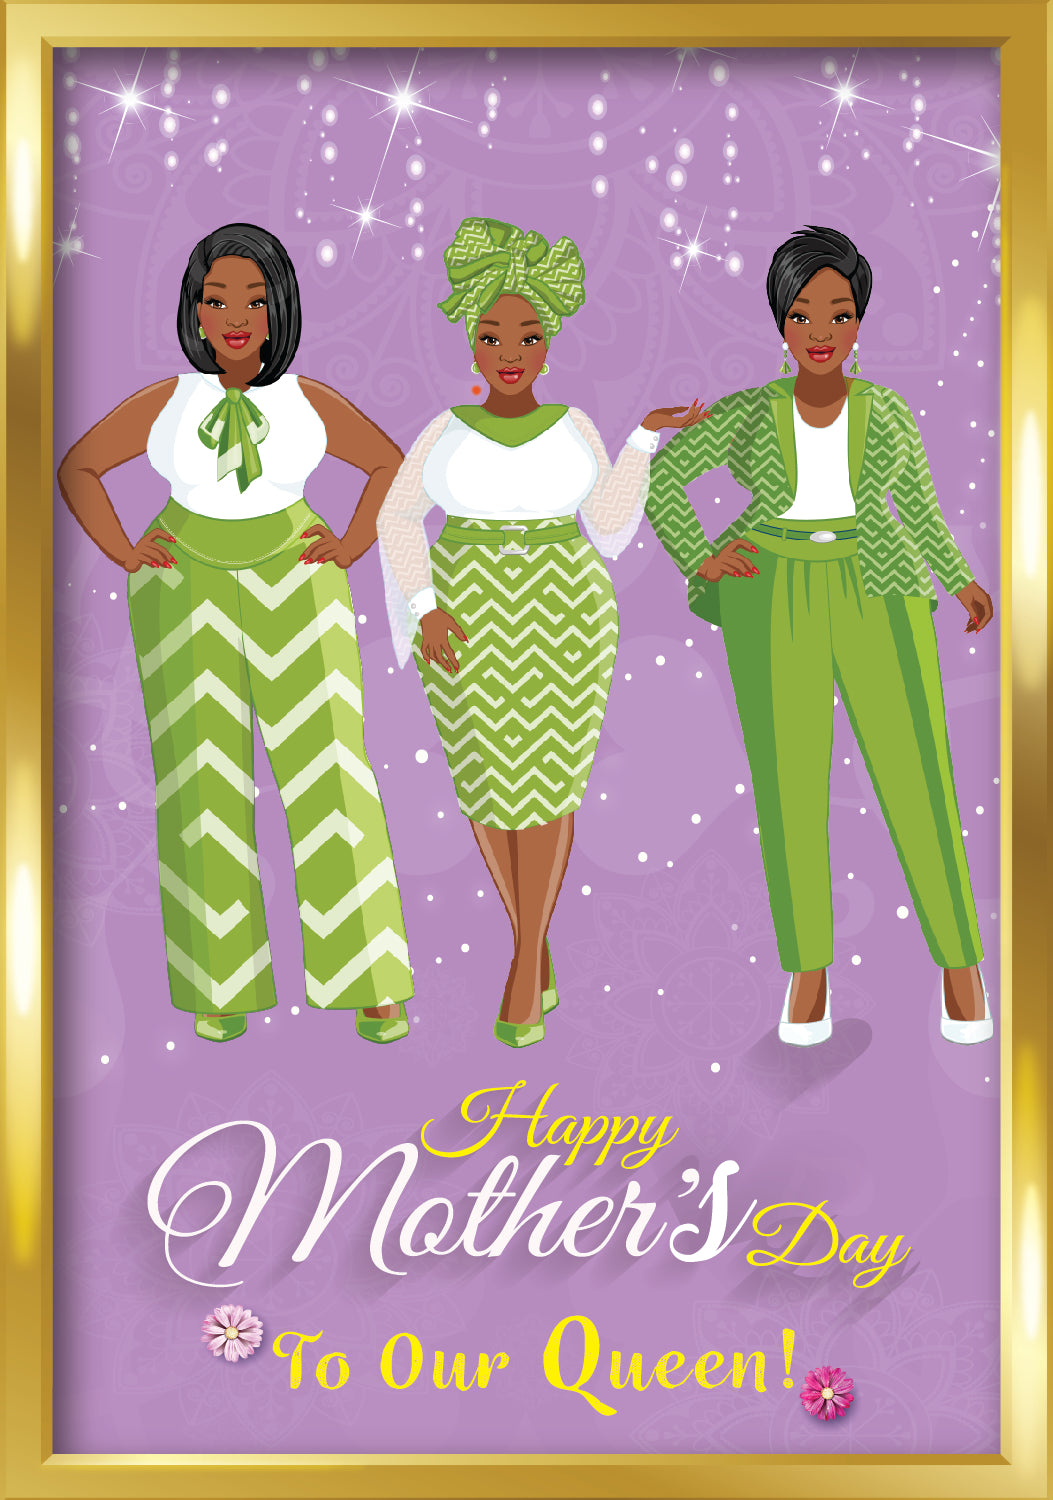 Happy Mother's Day To Our Queen! 3 Black Women- Purple/Green